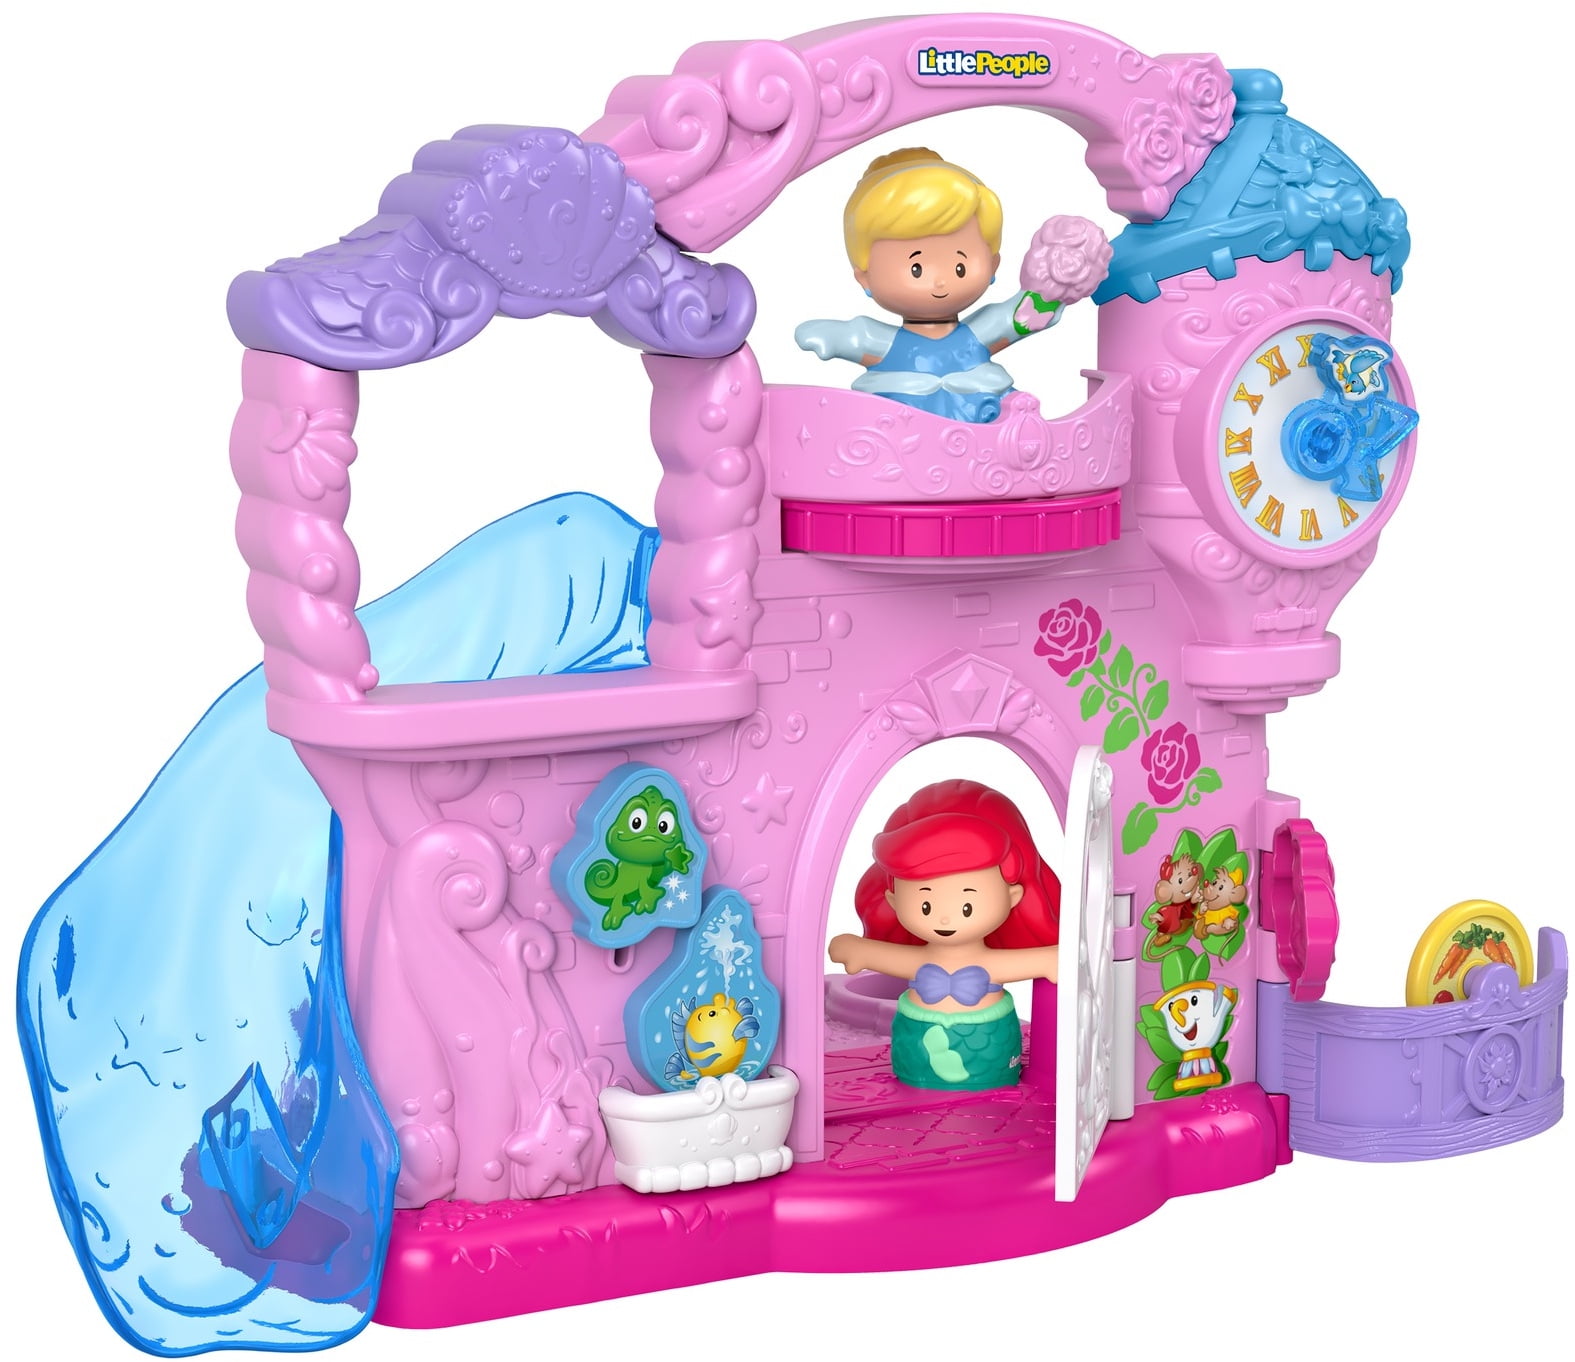 Fisher Price Little People Disney PRINCESS SNOW WHITE CASTLE Kingdom with APPLE 